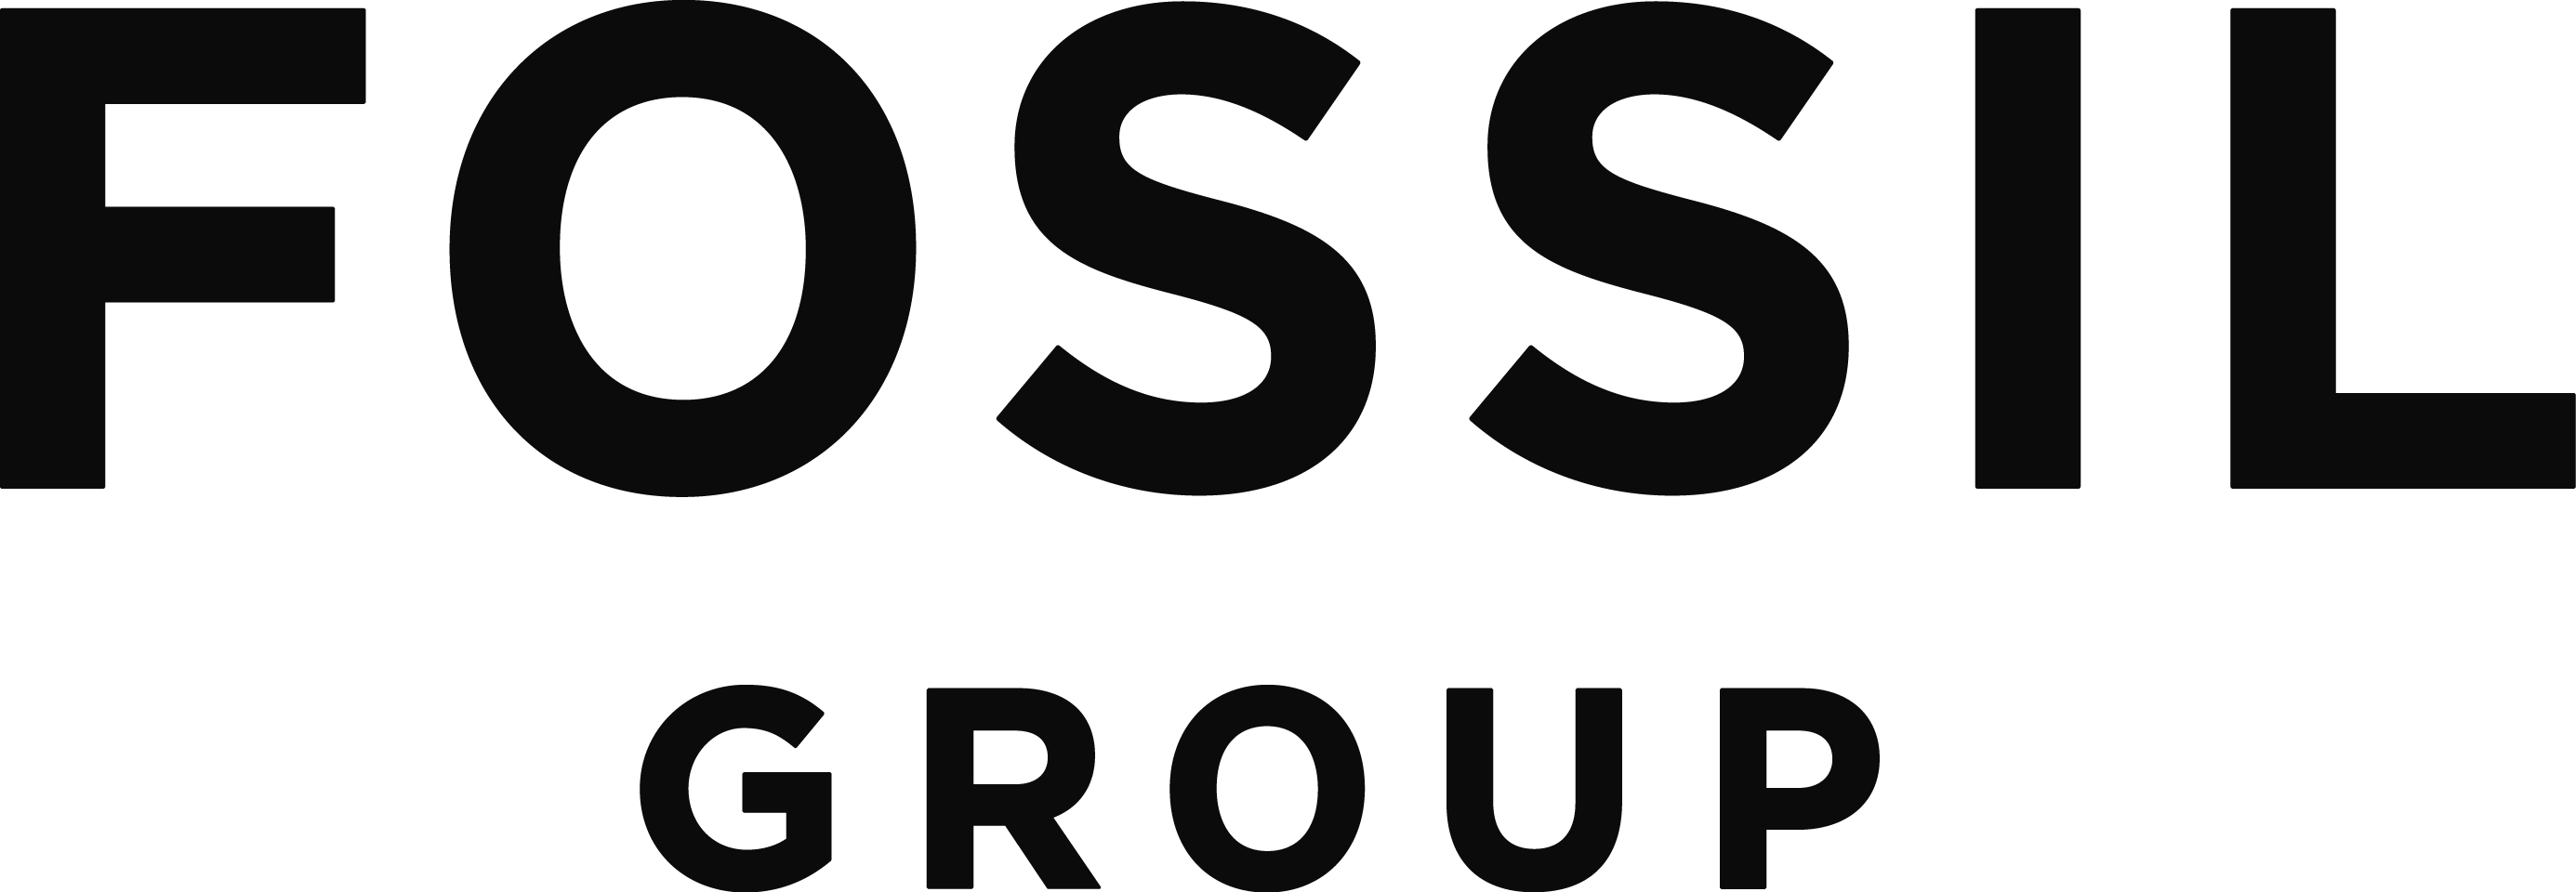 fossil_group_logo